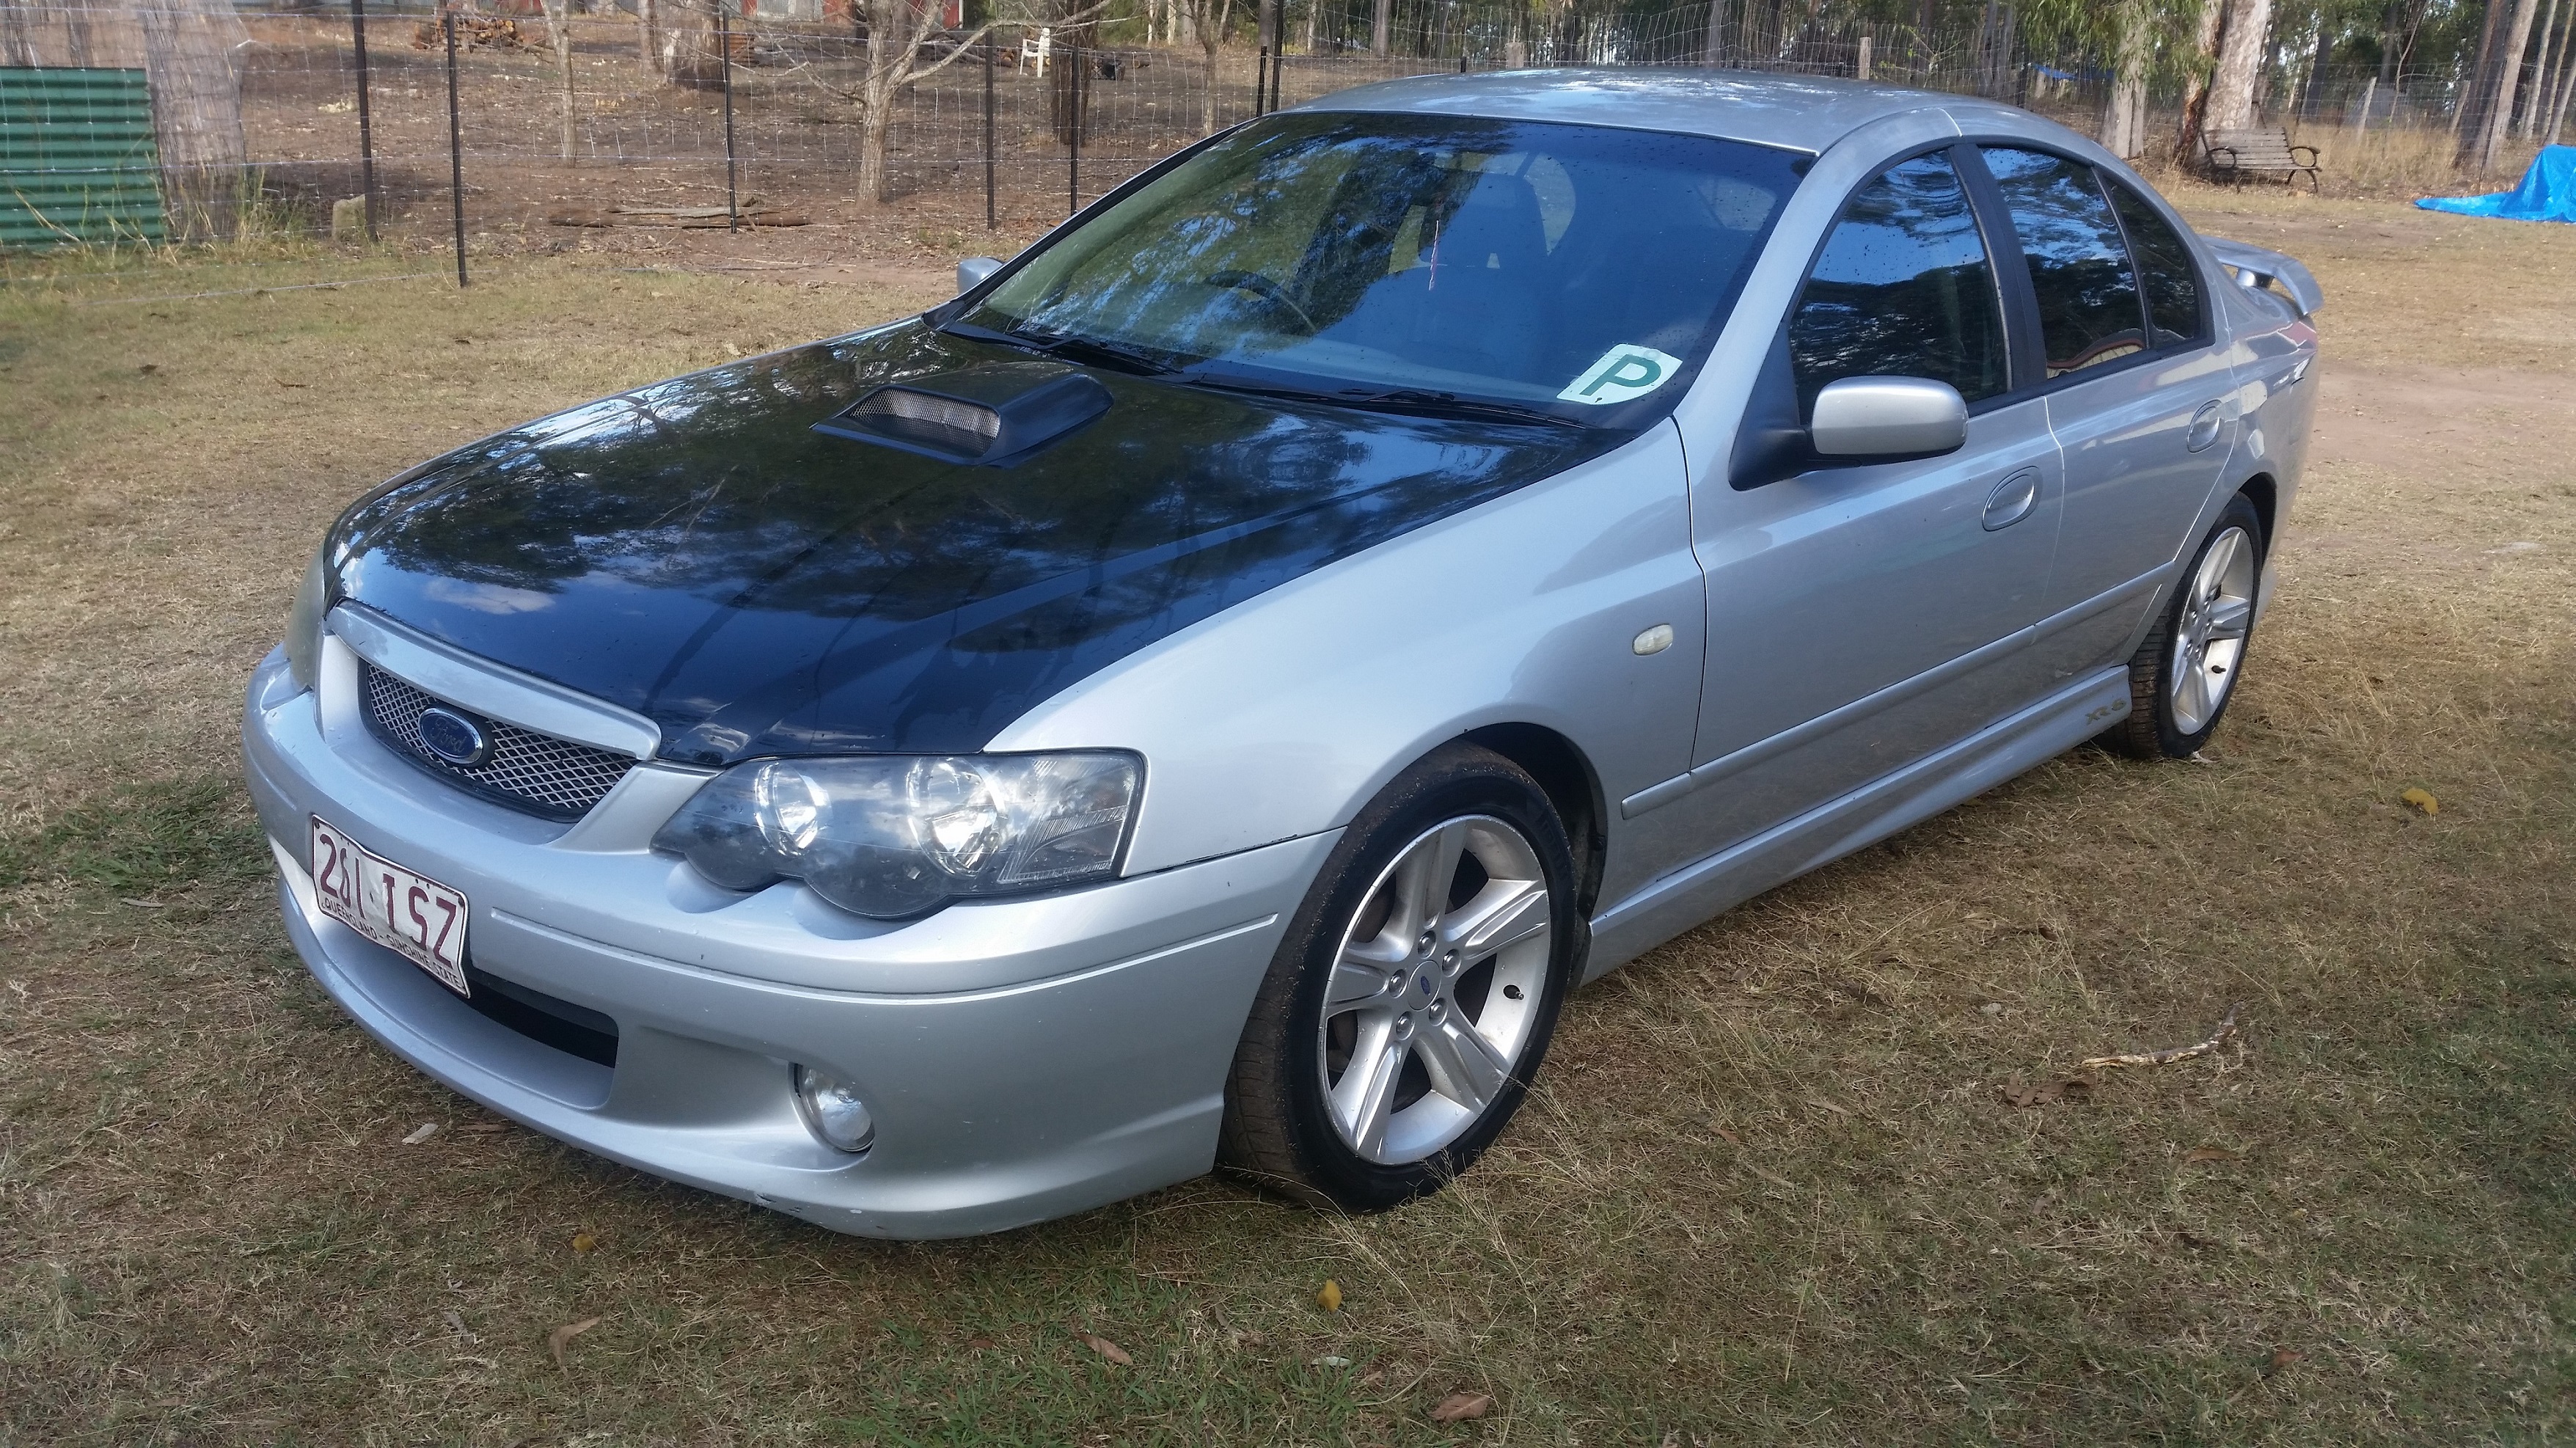 2005 Ford falcon ba mkii xr6 review #2